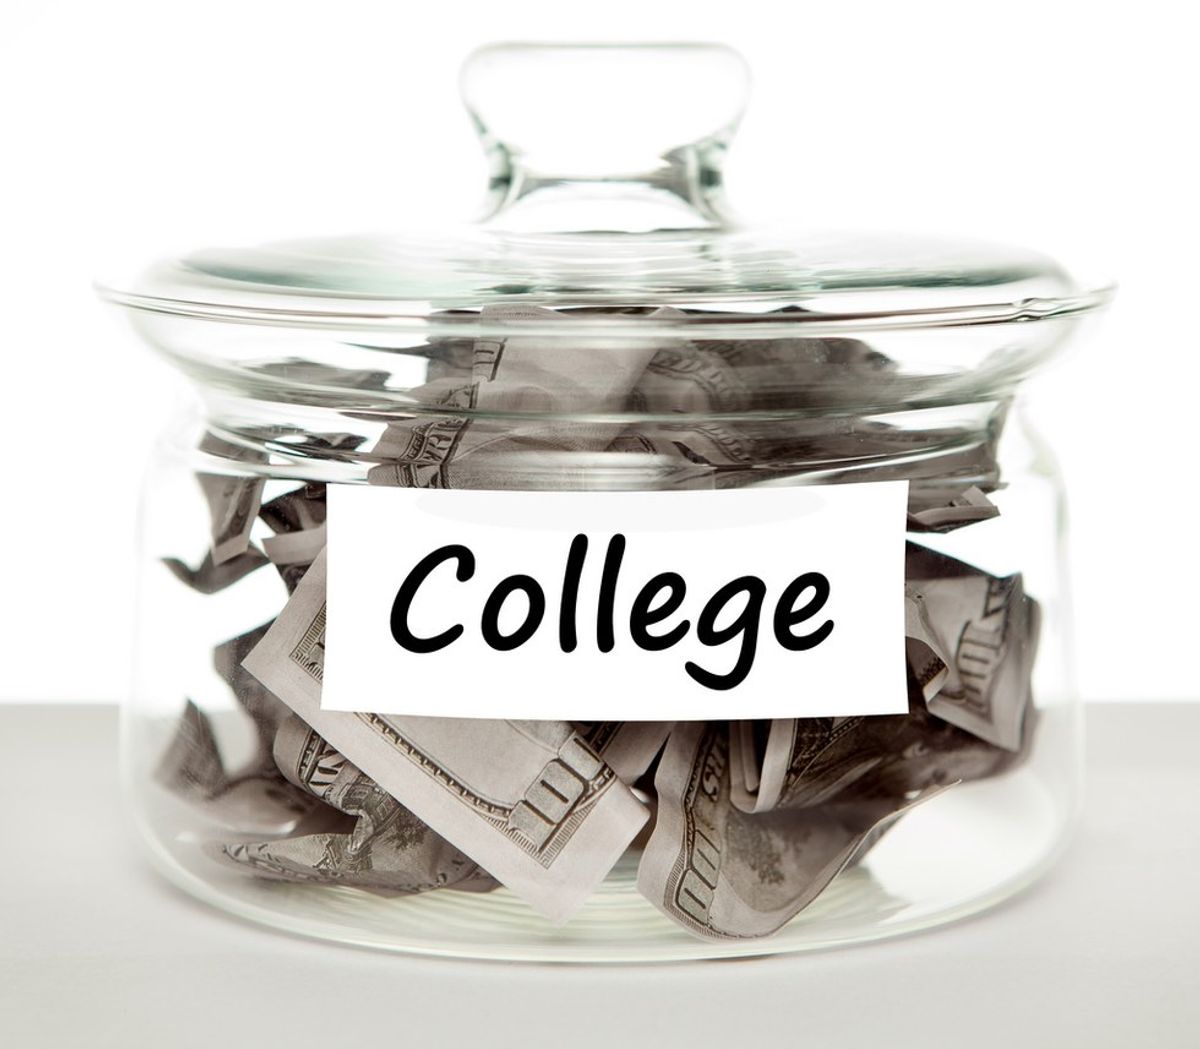 Under Pressure: The Stress Of A College Student